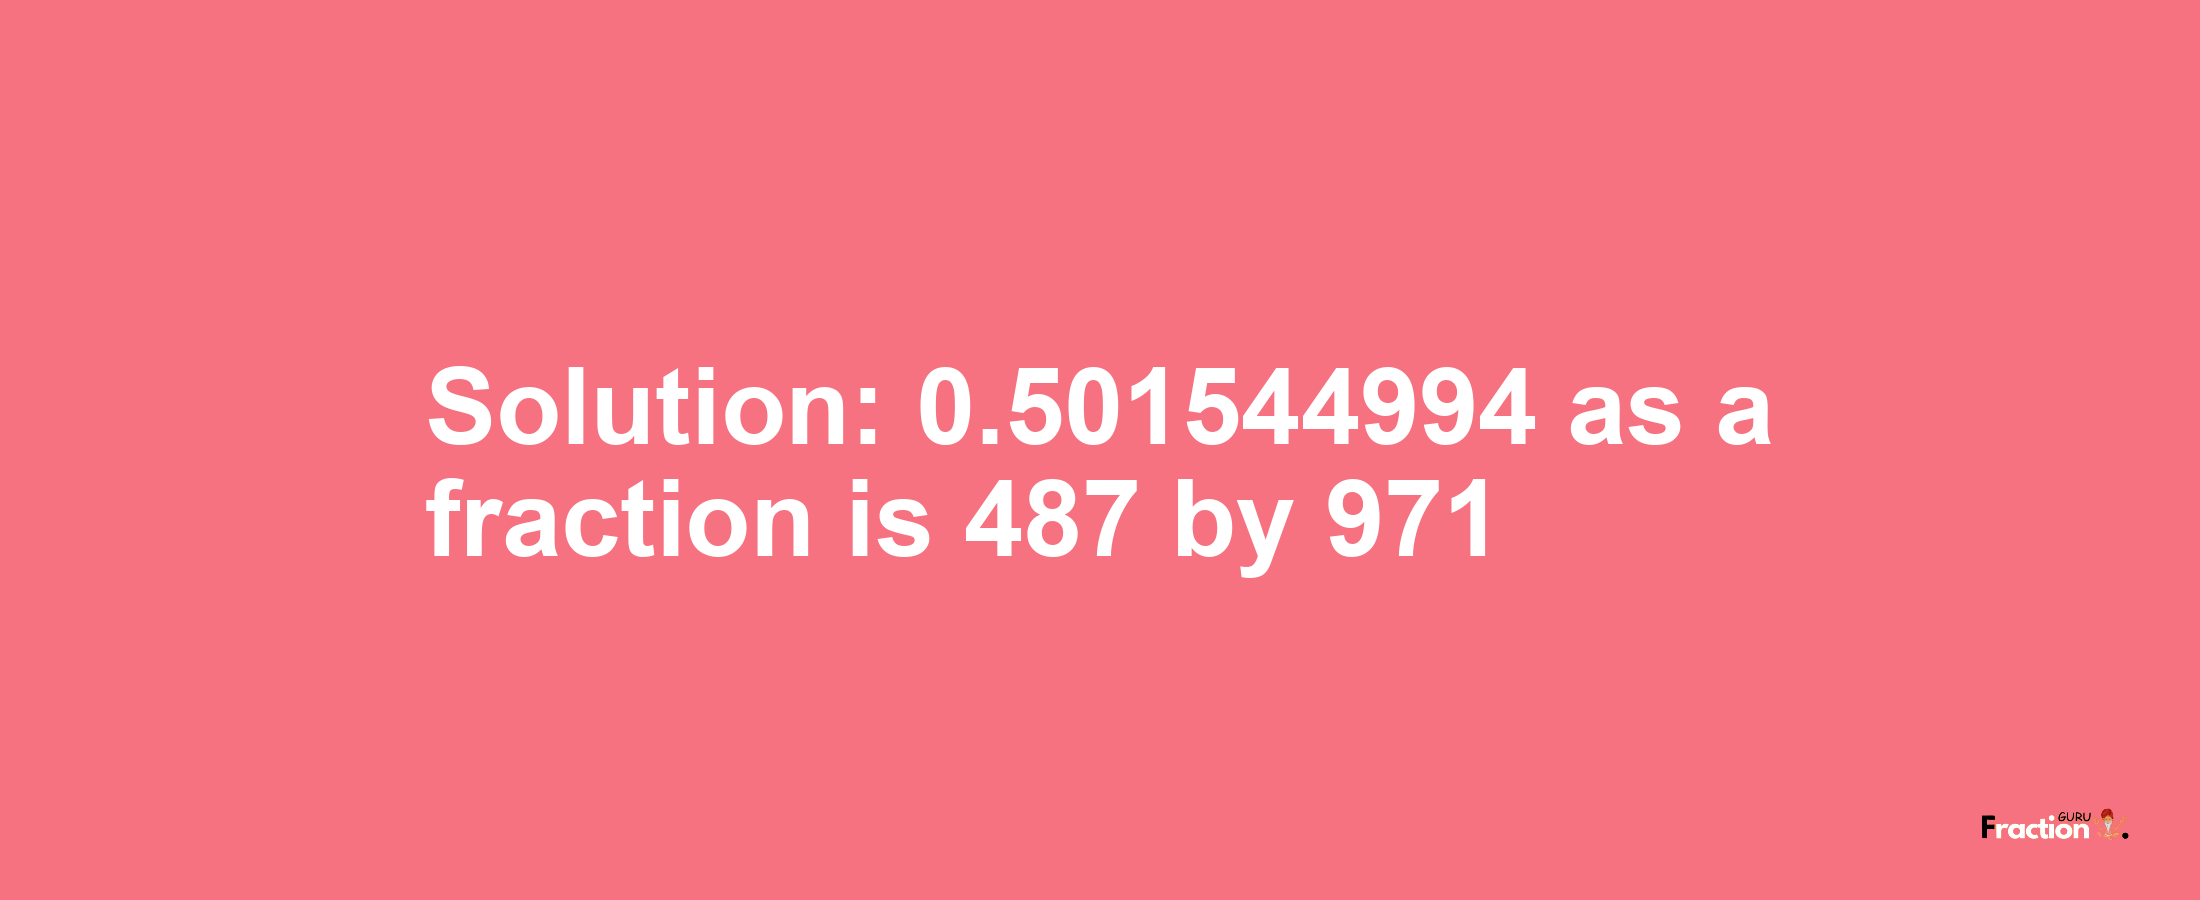 Solution:0.501544994 as a fraction is 487/971